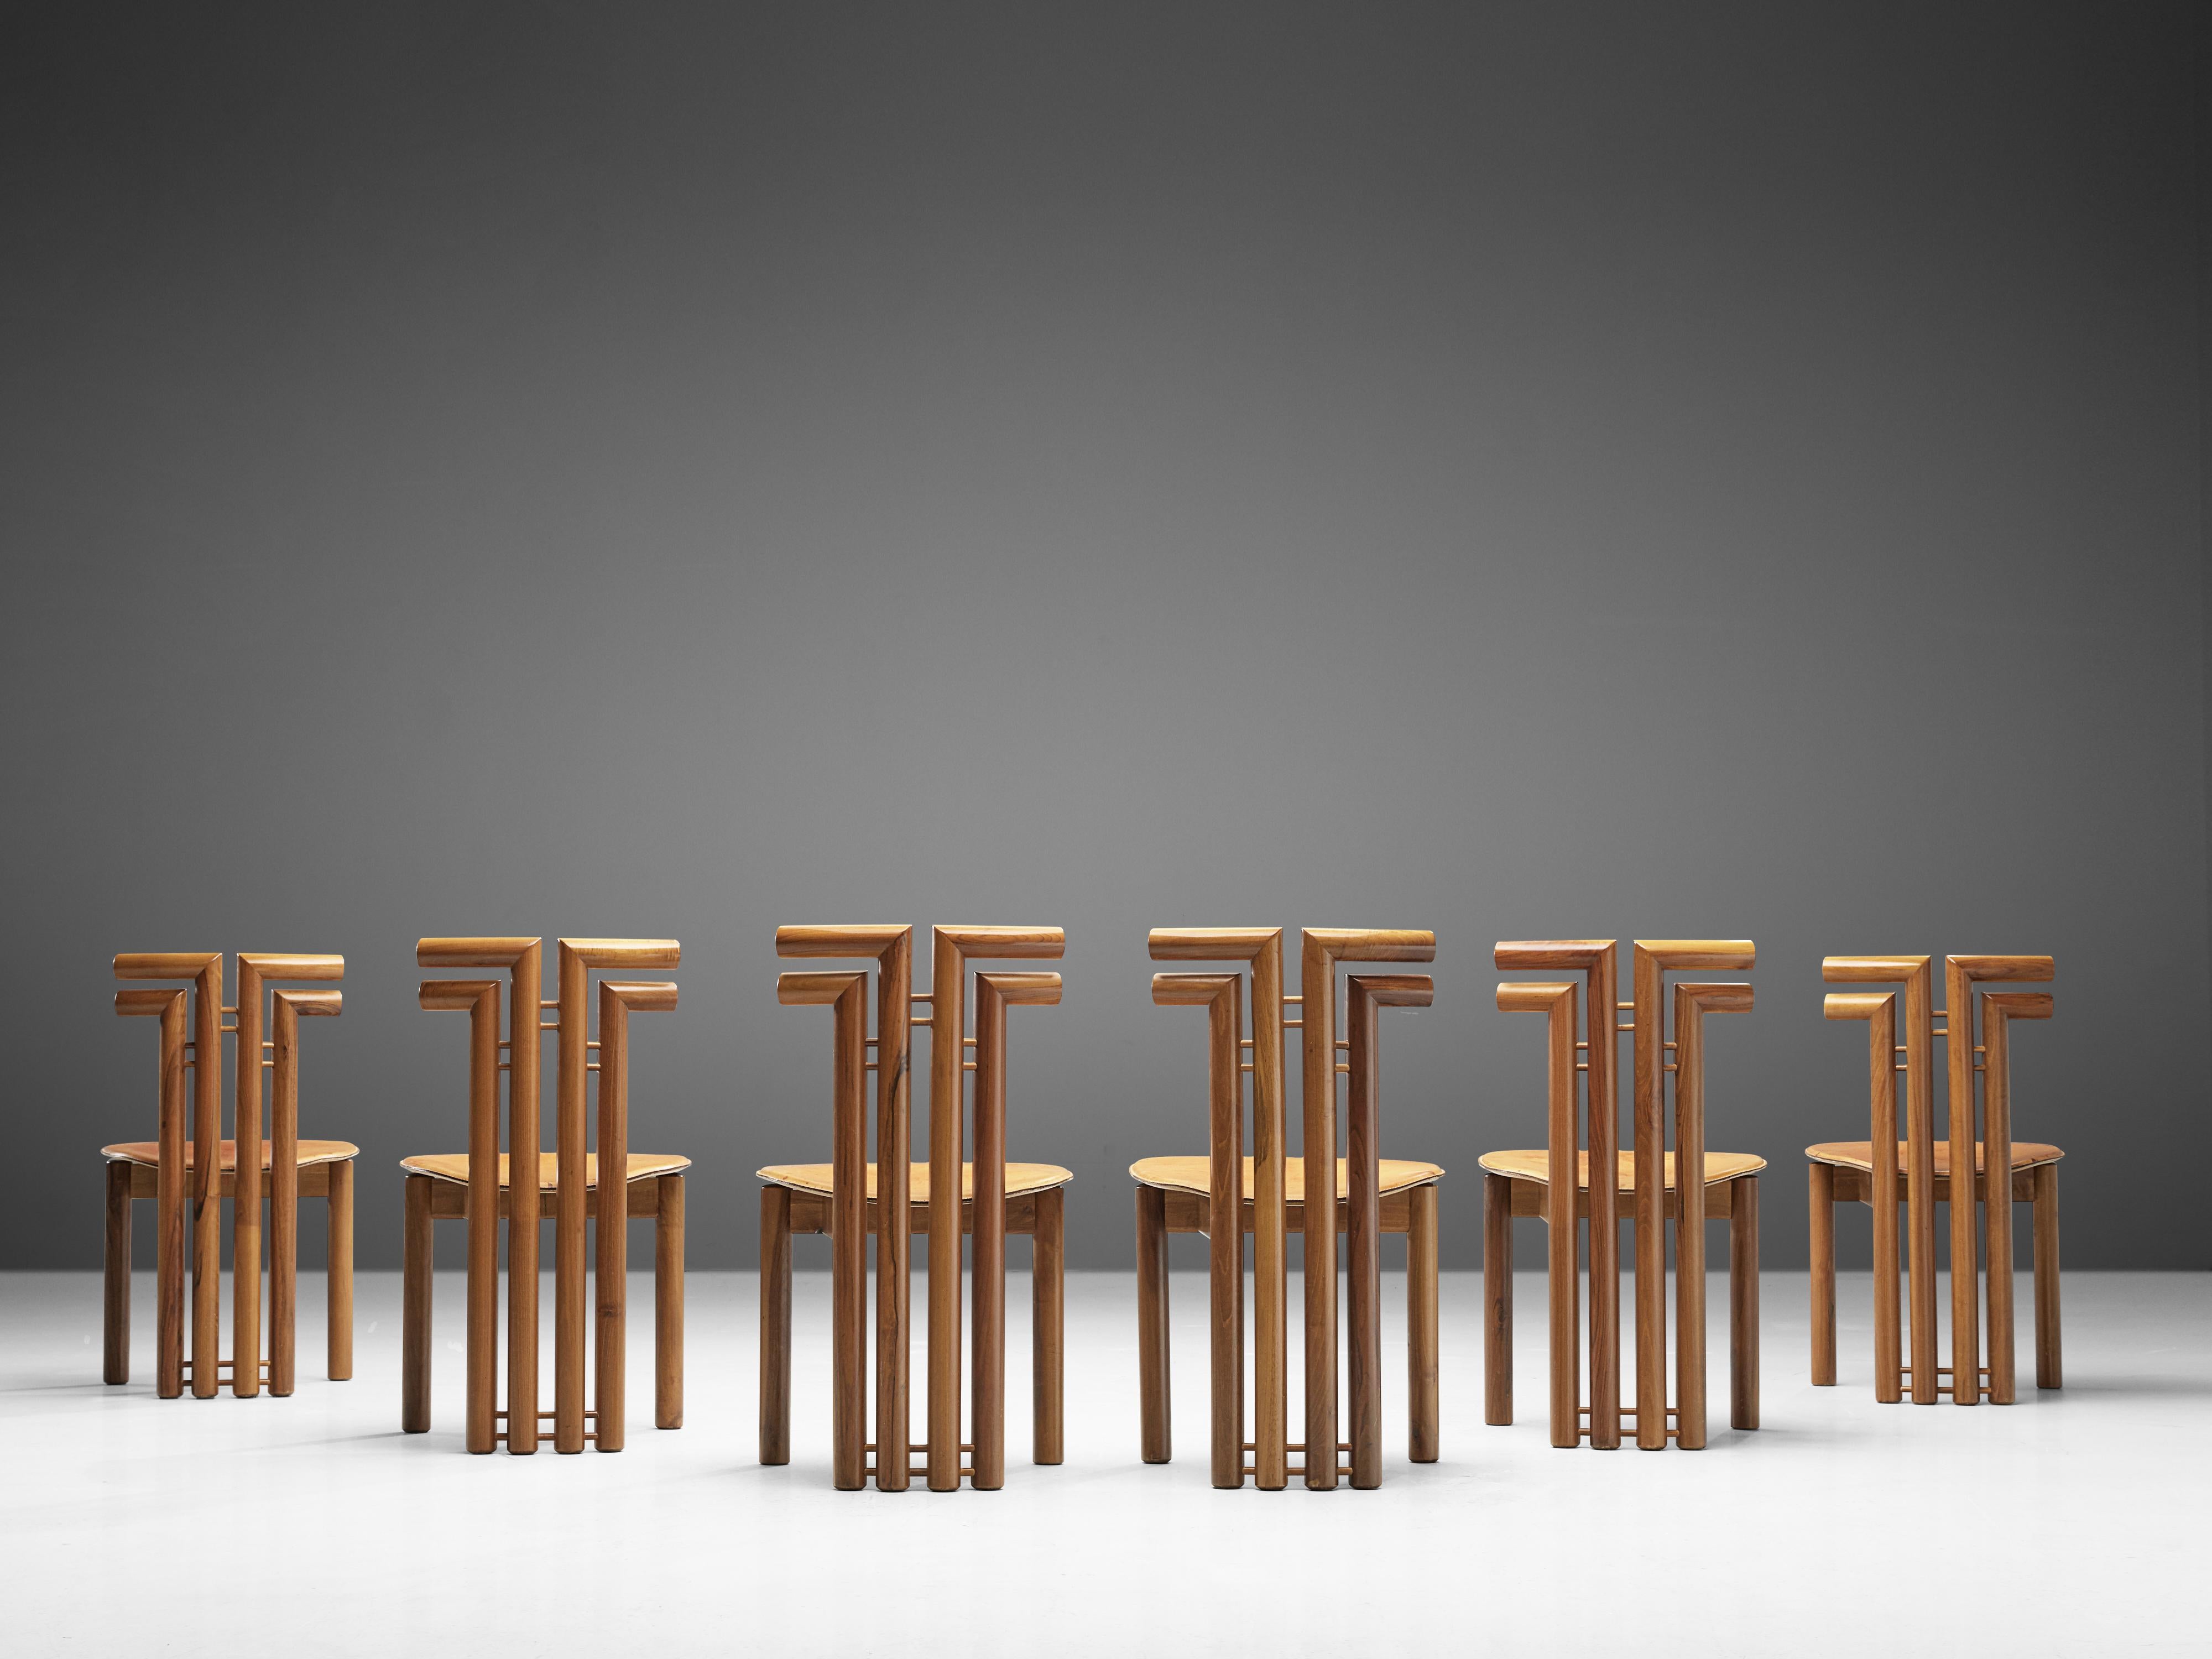 Set of six dining chairs, Italian walnut and cognac leather, Italy, 1970s.

Set of sculptural chairs that feature wonderful backrests, consisting of four legs that form out to the side, which creates a sculptural appearance. The front legs are